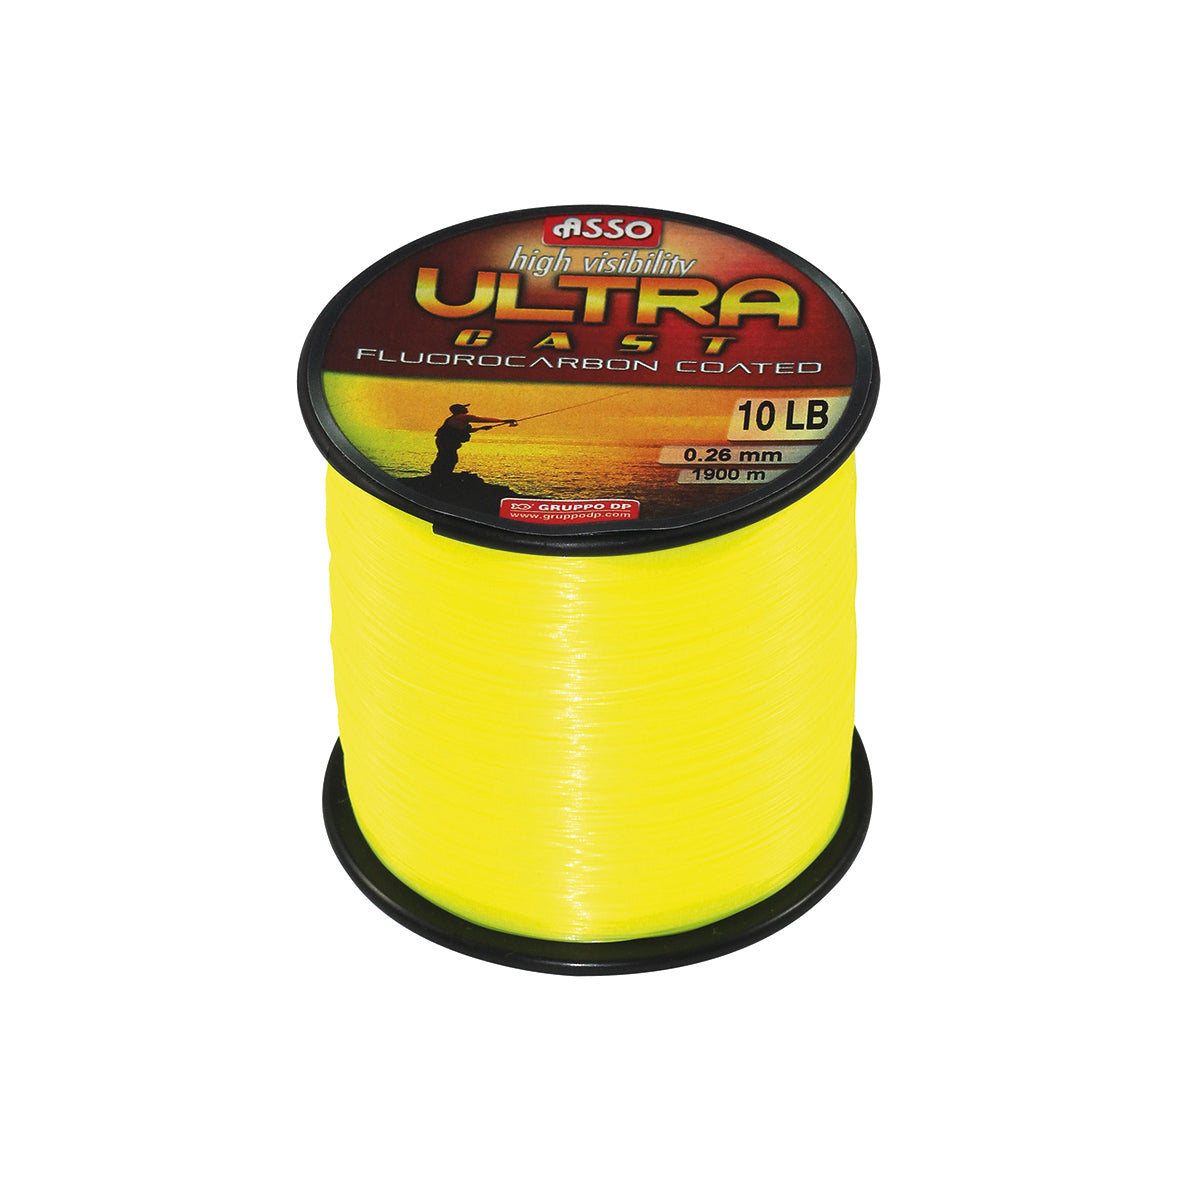 ASSO Ultra Cast Fluorocarbon Fishing Line 10LB Yellow